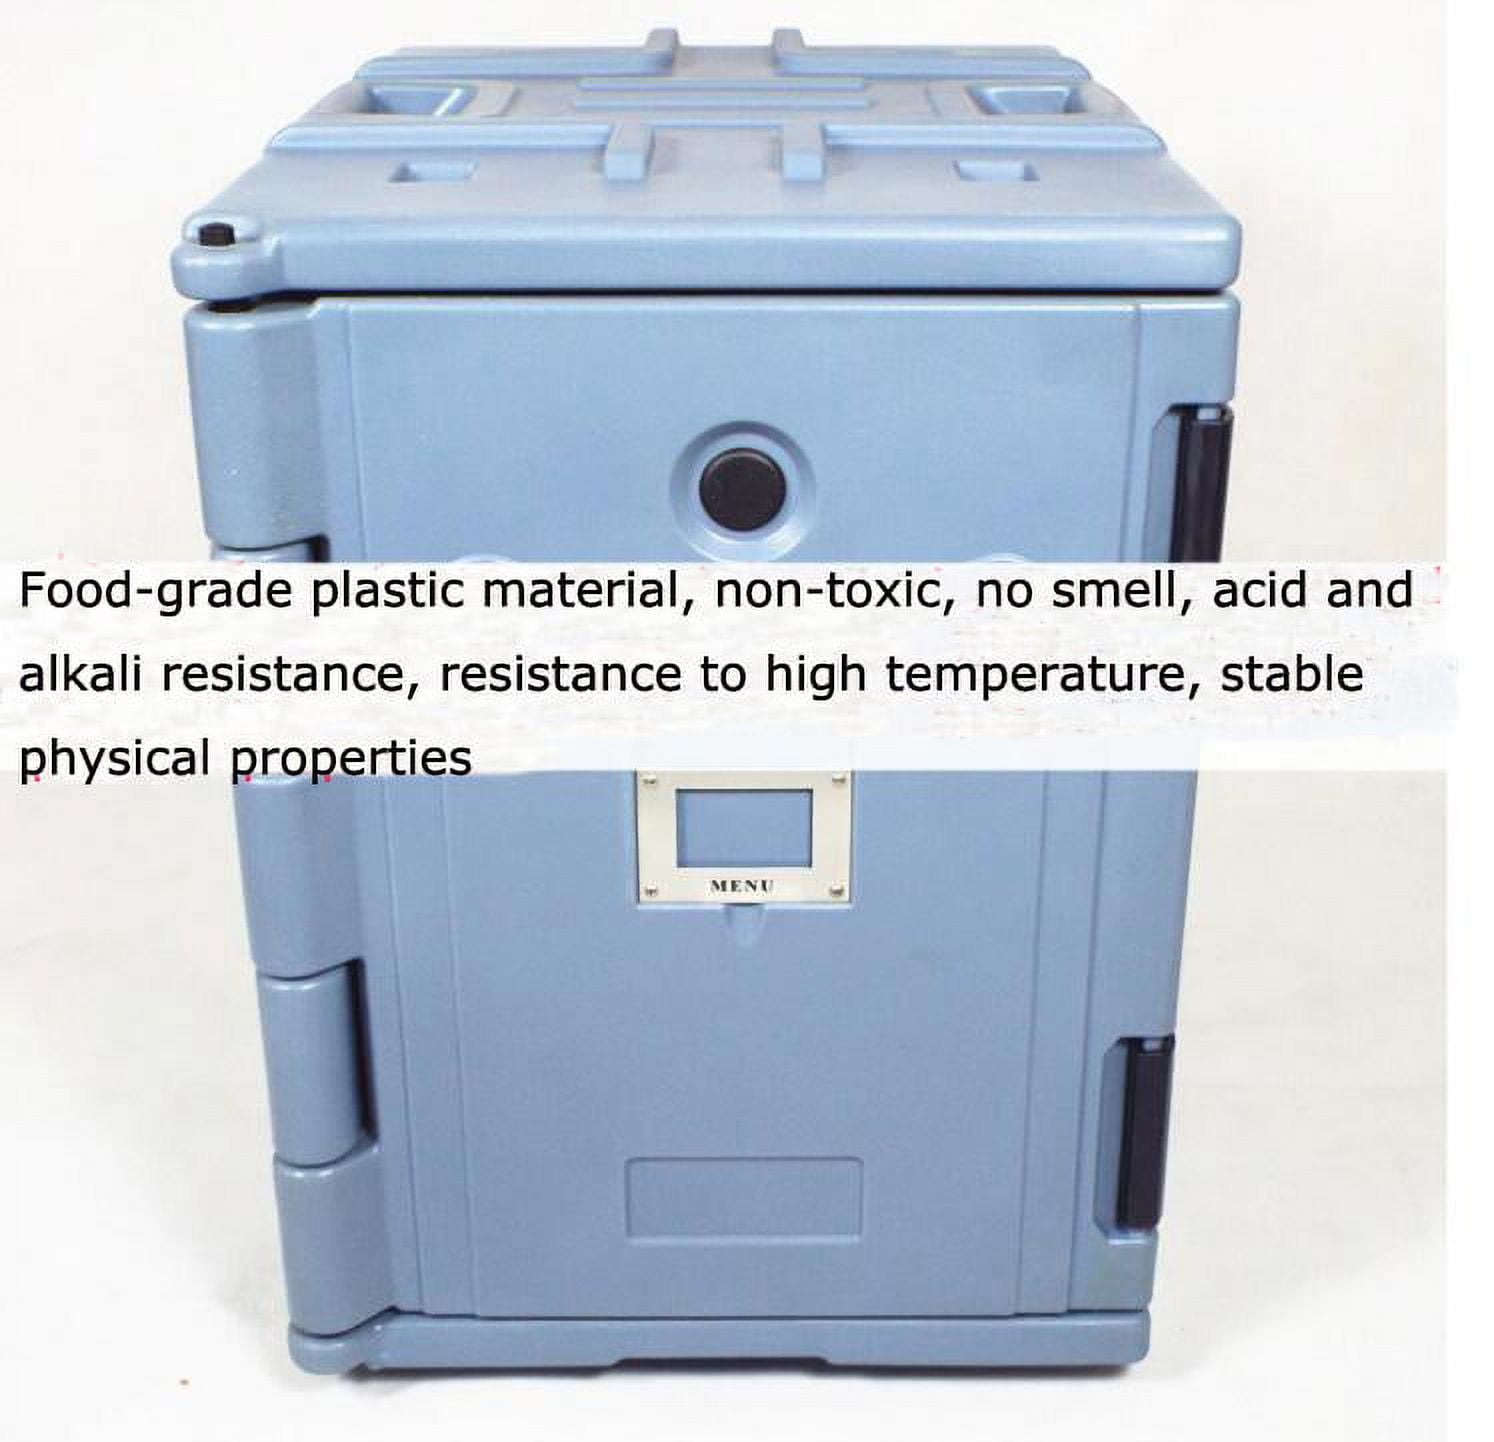 INTBUYING Insulated Food Transport Carrier Expandable Catering Hot Cold  Dish Pan Containers Plates not included